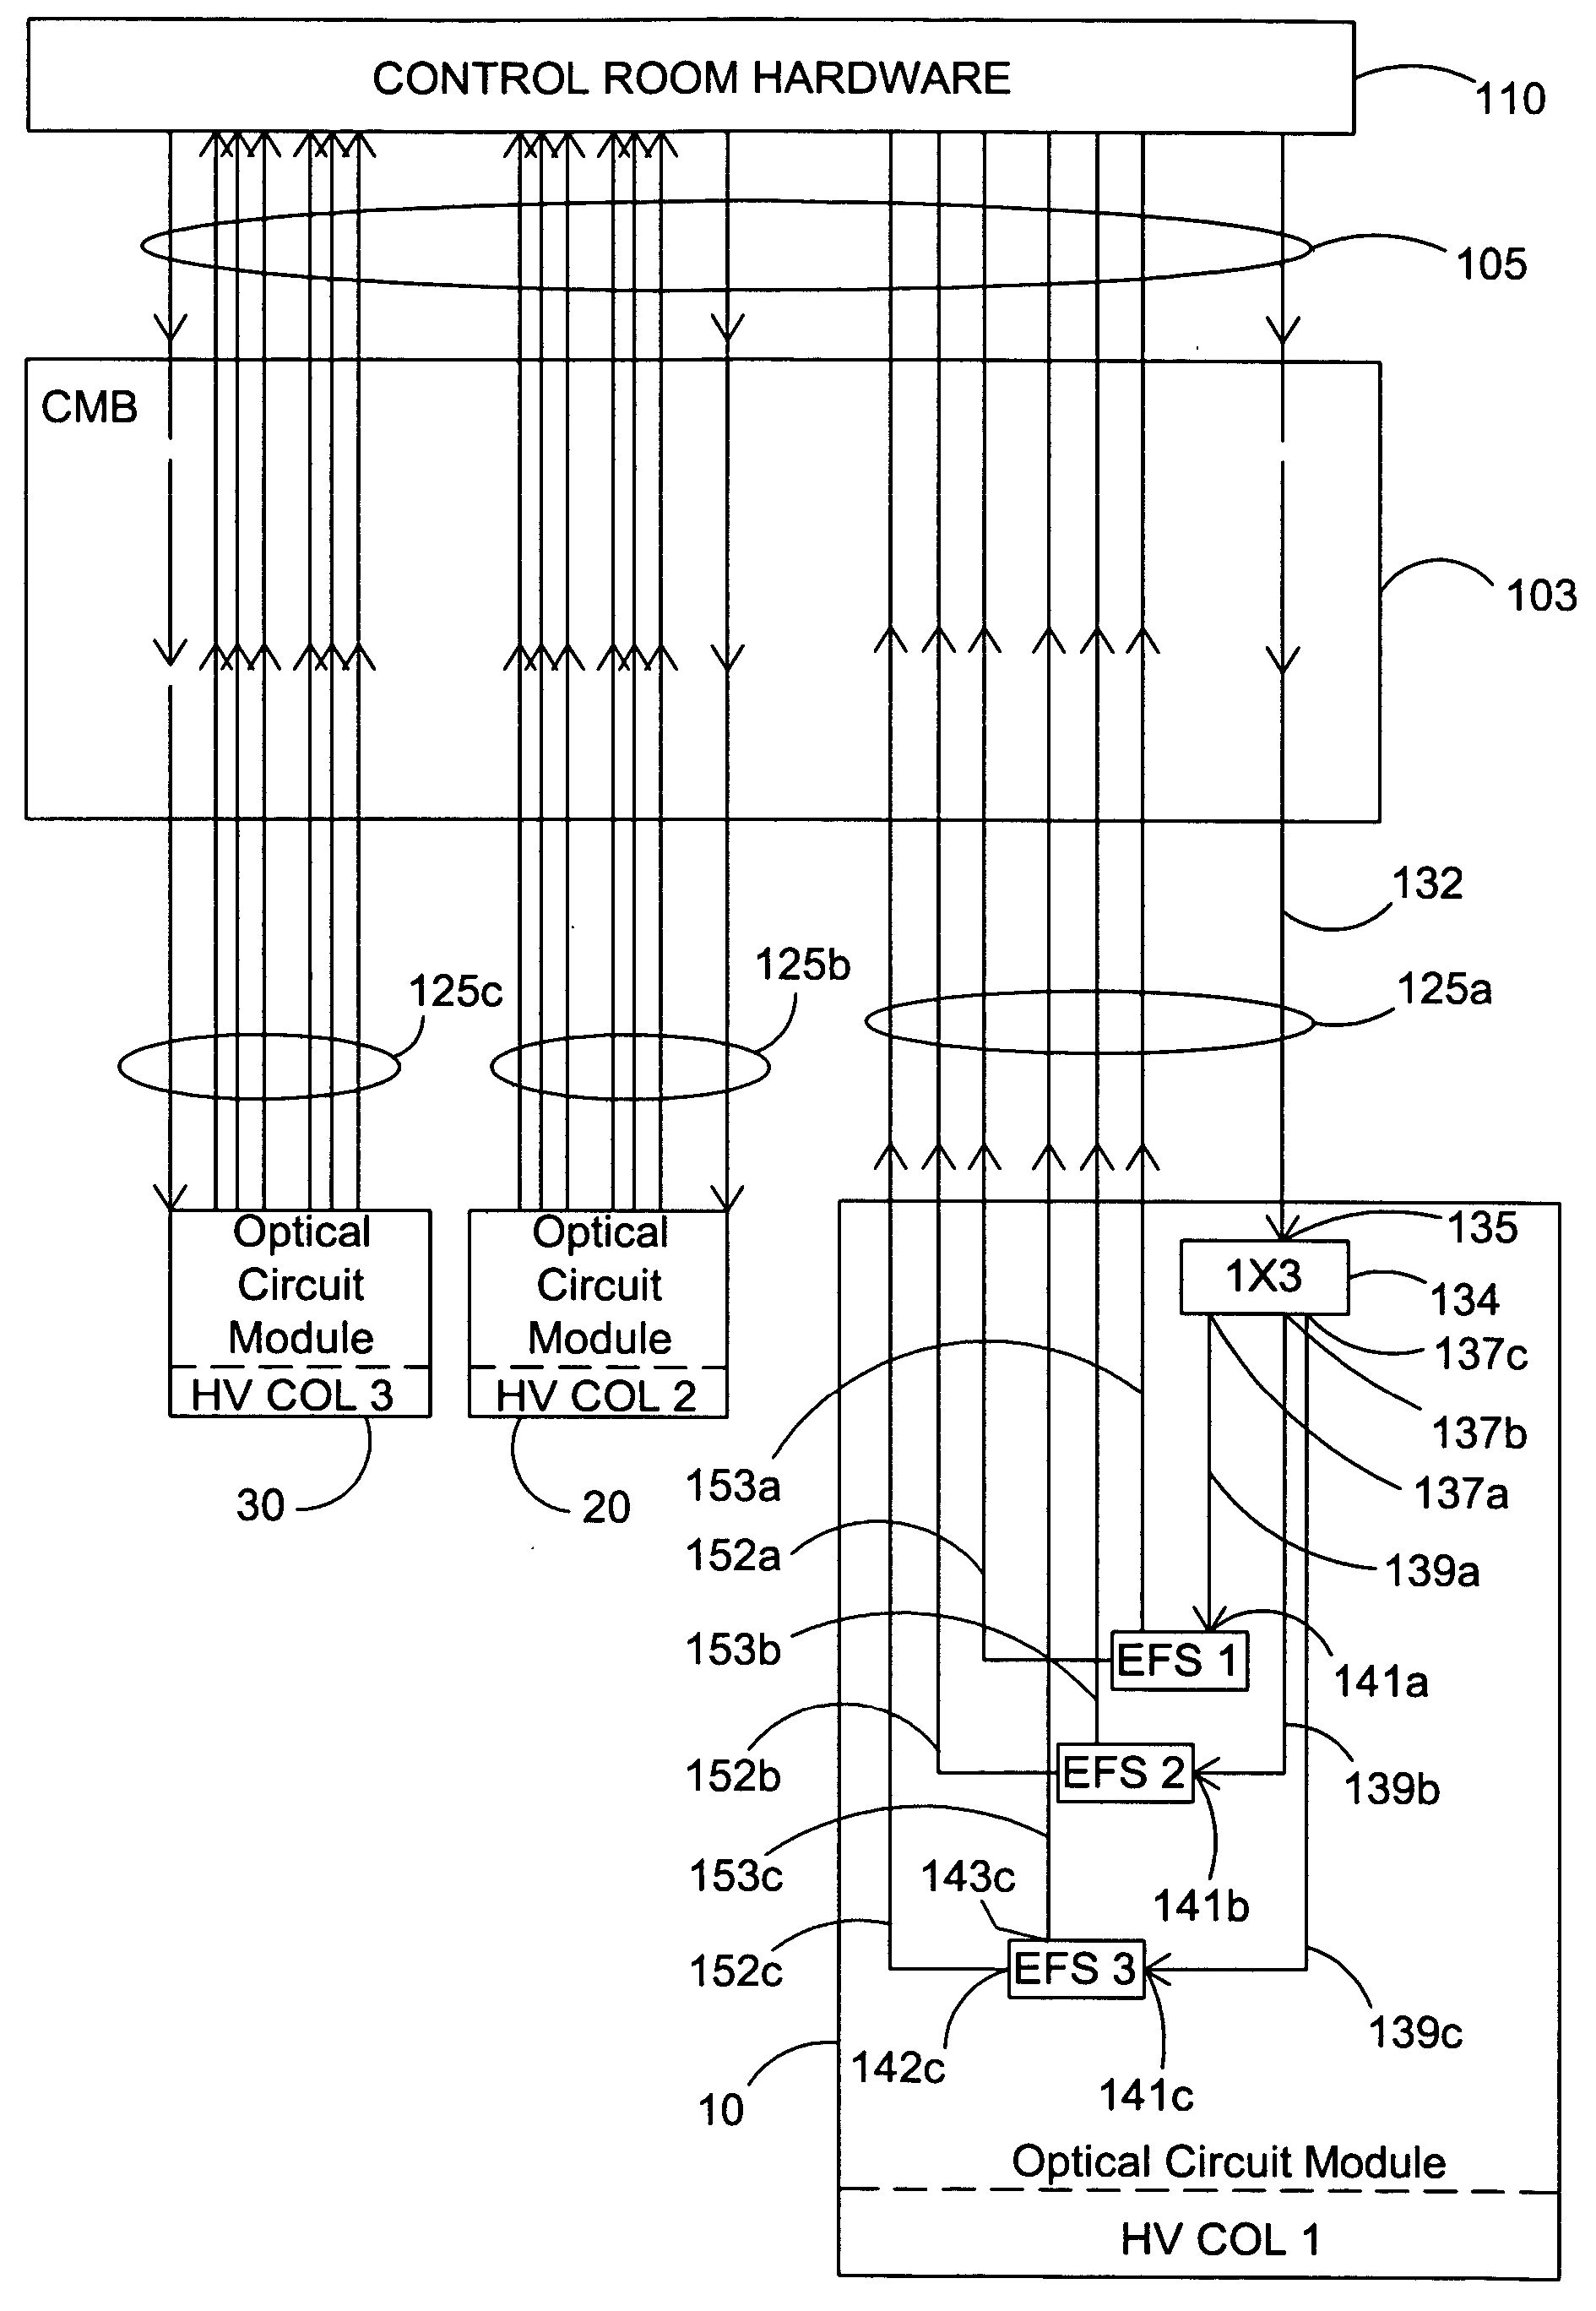 Time division multiplexed optical measuring system